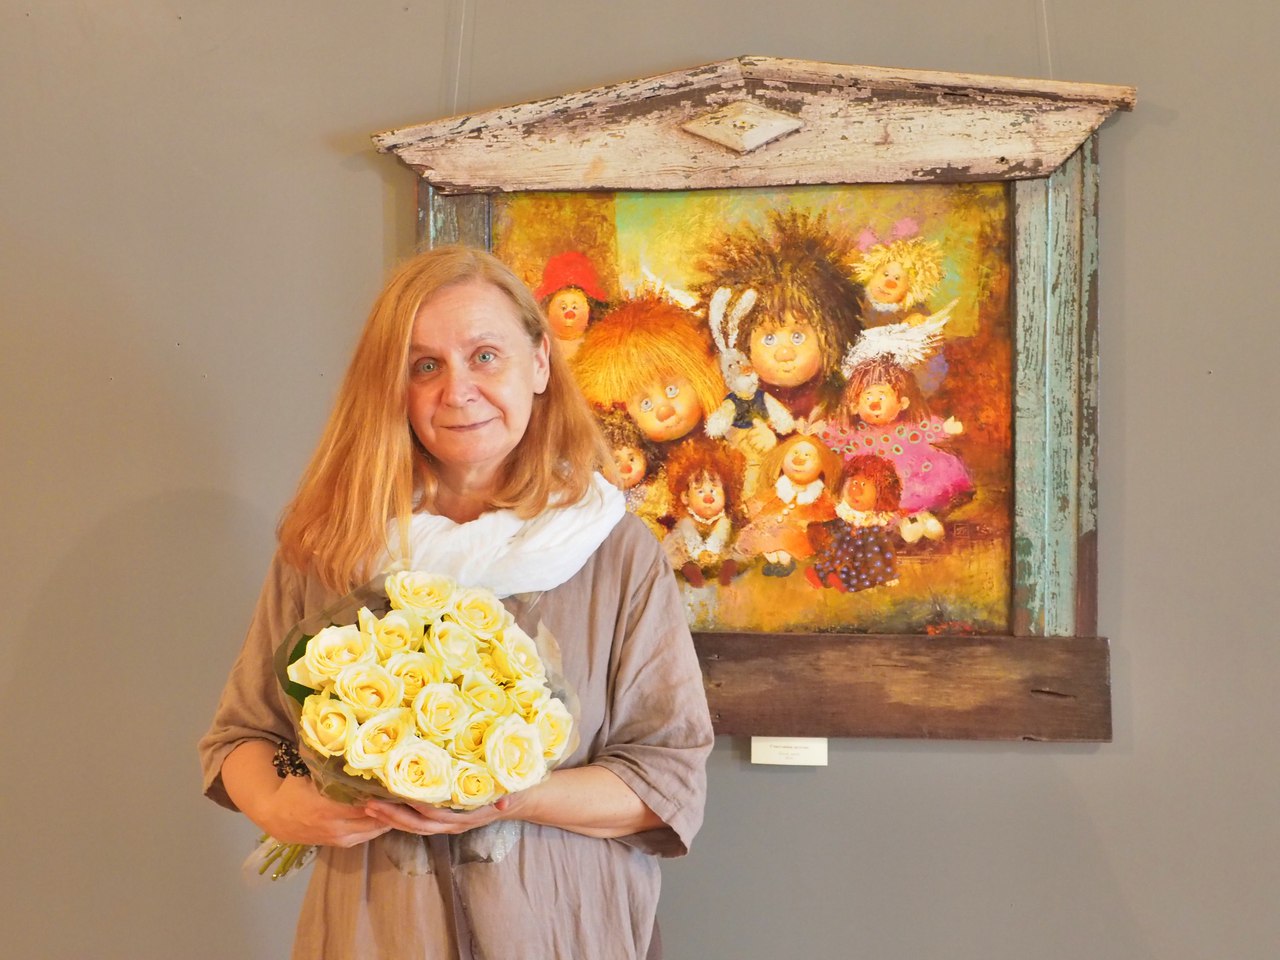 Exhibition of Galina Chuvilyaeva “Angels and a magic forest”